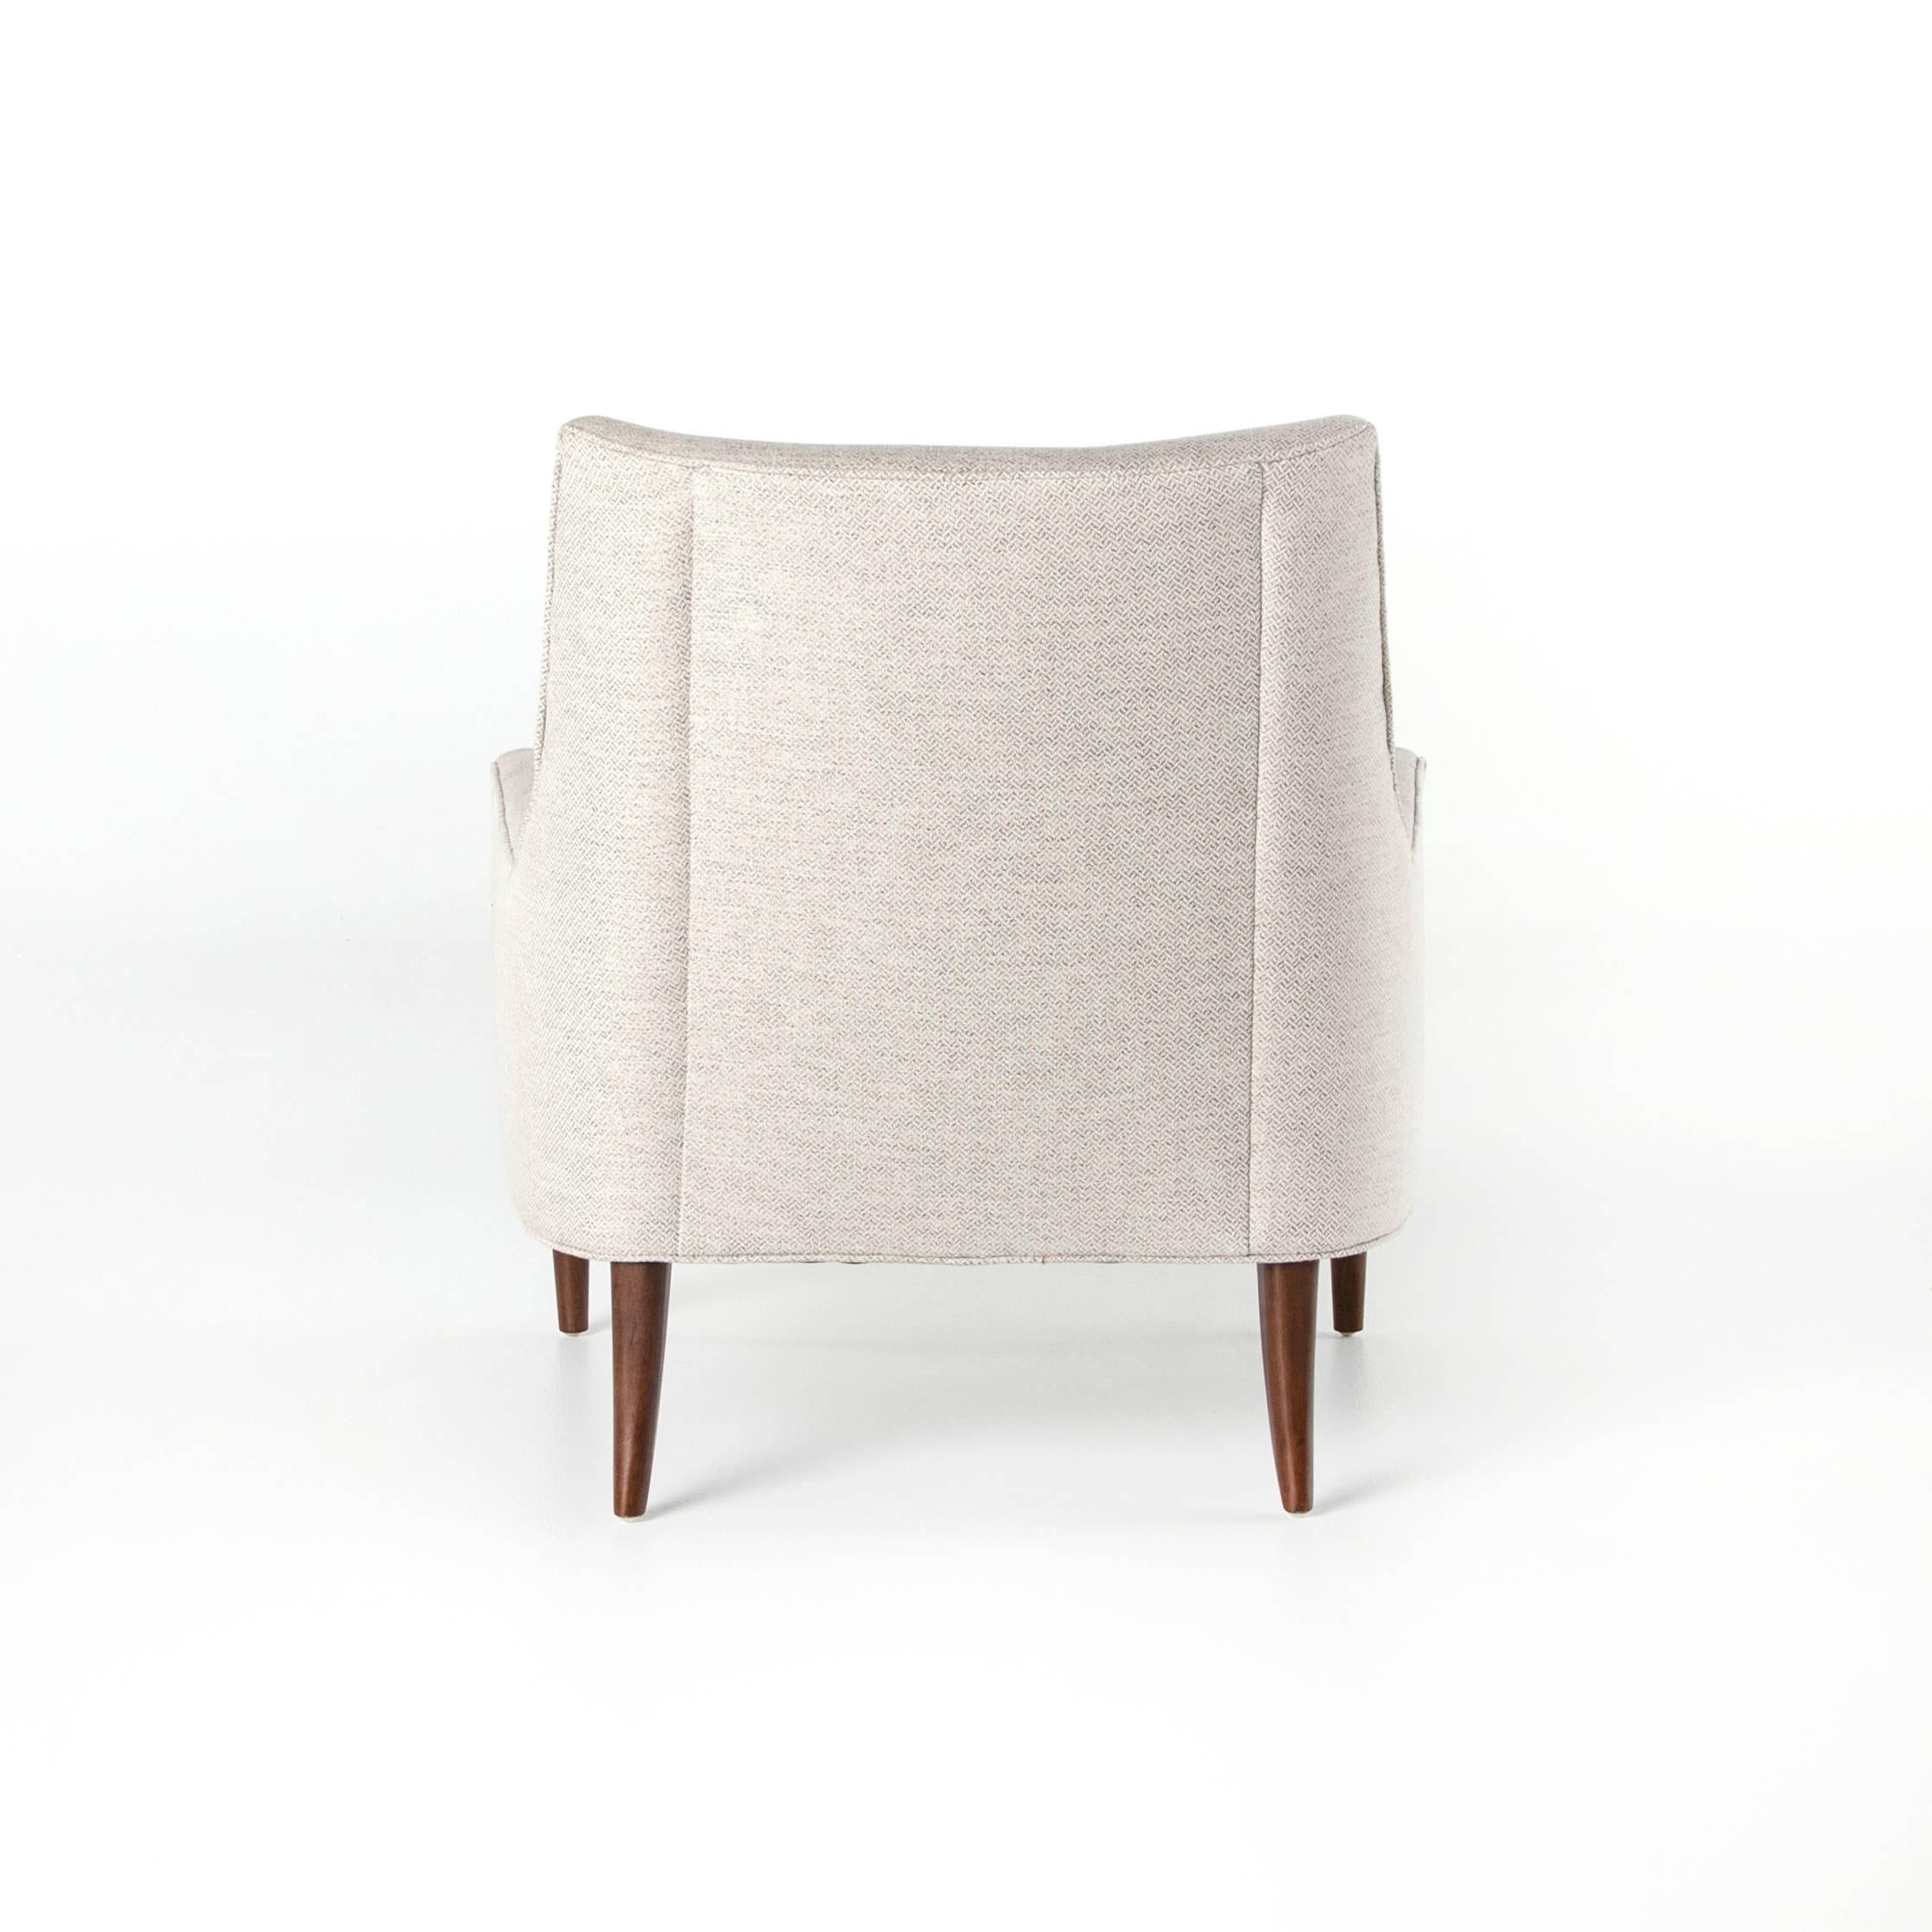 Mid-Century shaping offers comfortably molded curves to the wing chair. Crisp, neutral fabric adds a textural, woven feel paired with classically tapered legs.
Also available in leather.